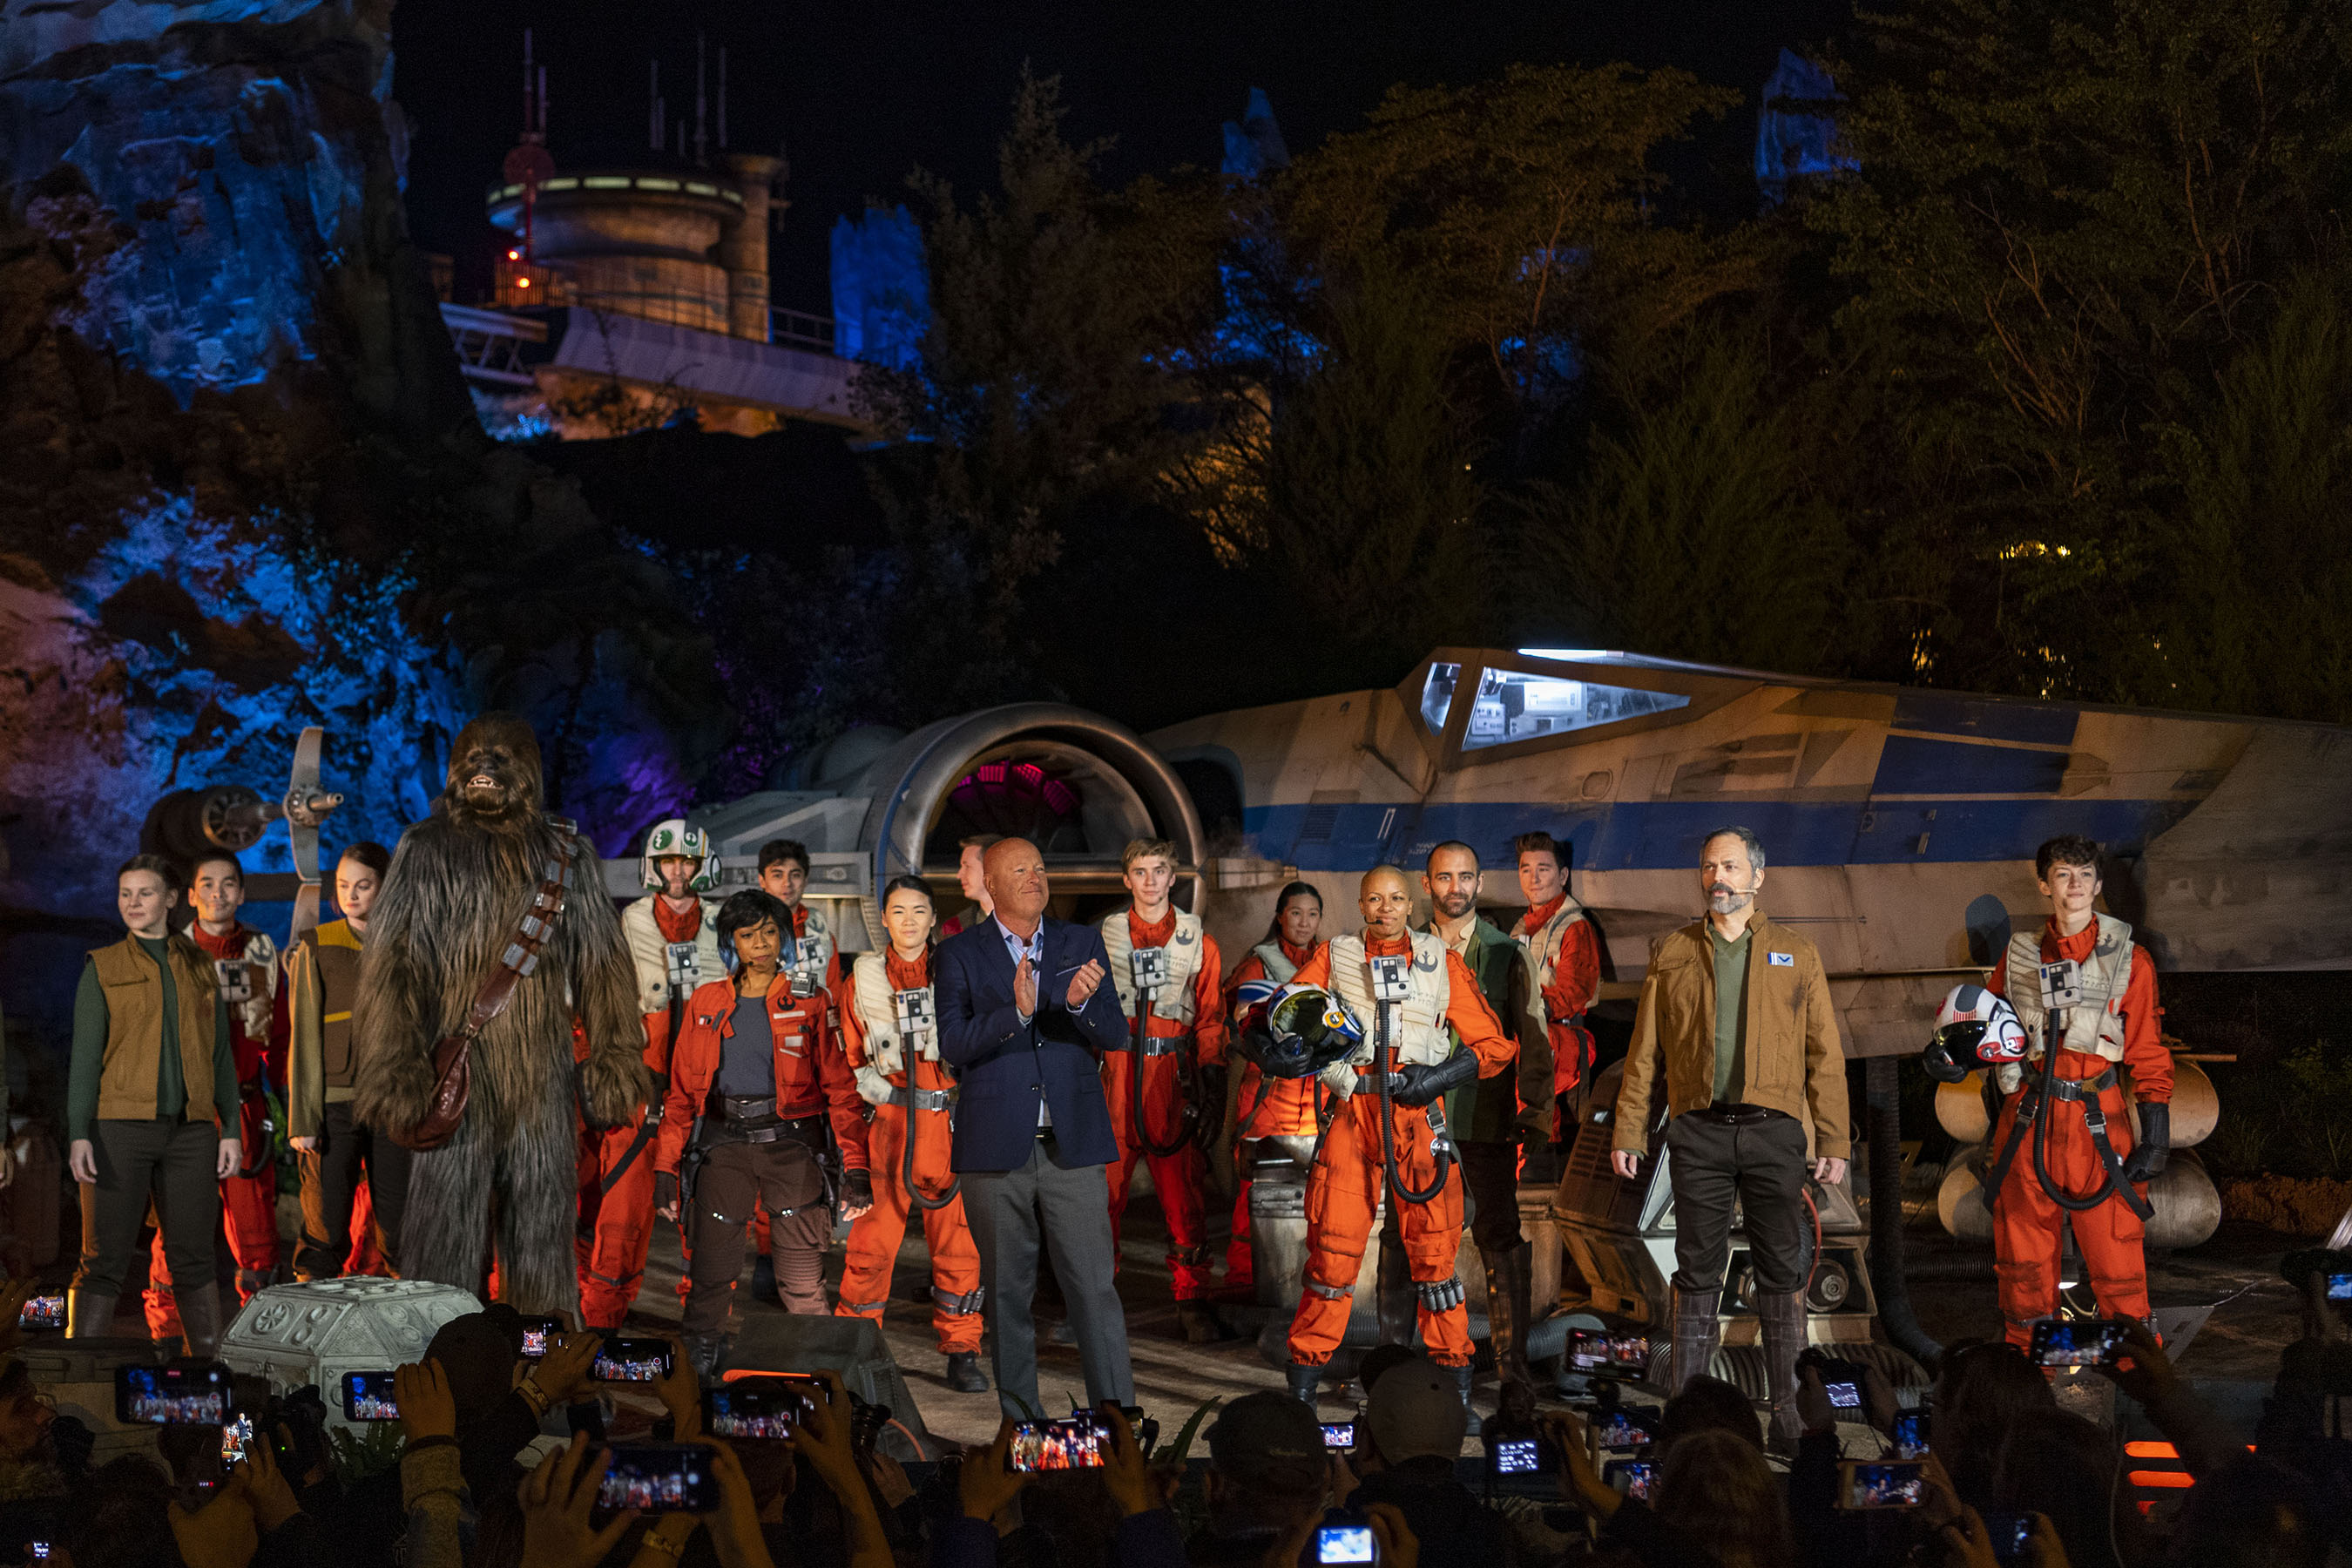 Star Wars: Rise of the Resistance dedication ceremony at Disney's Hollywood Studios